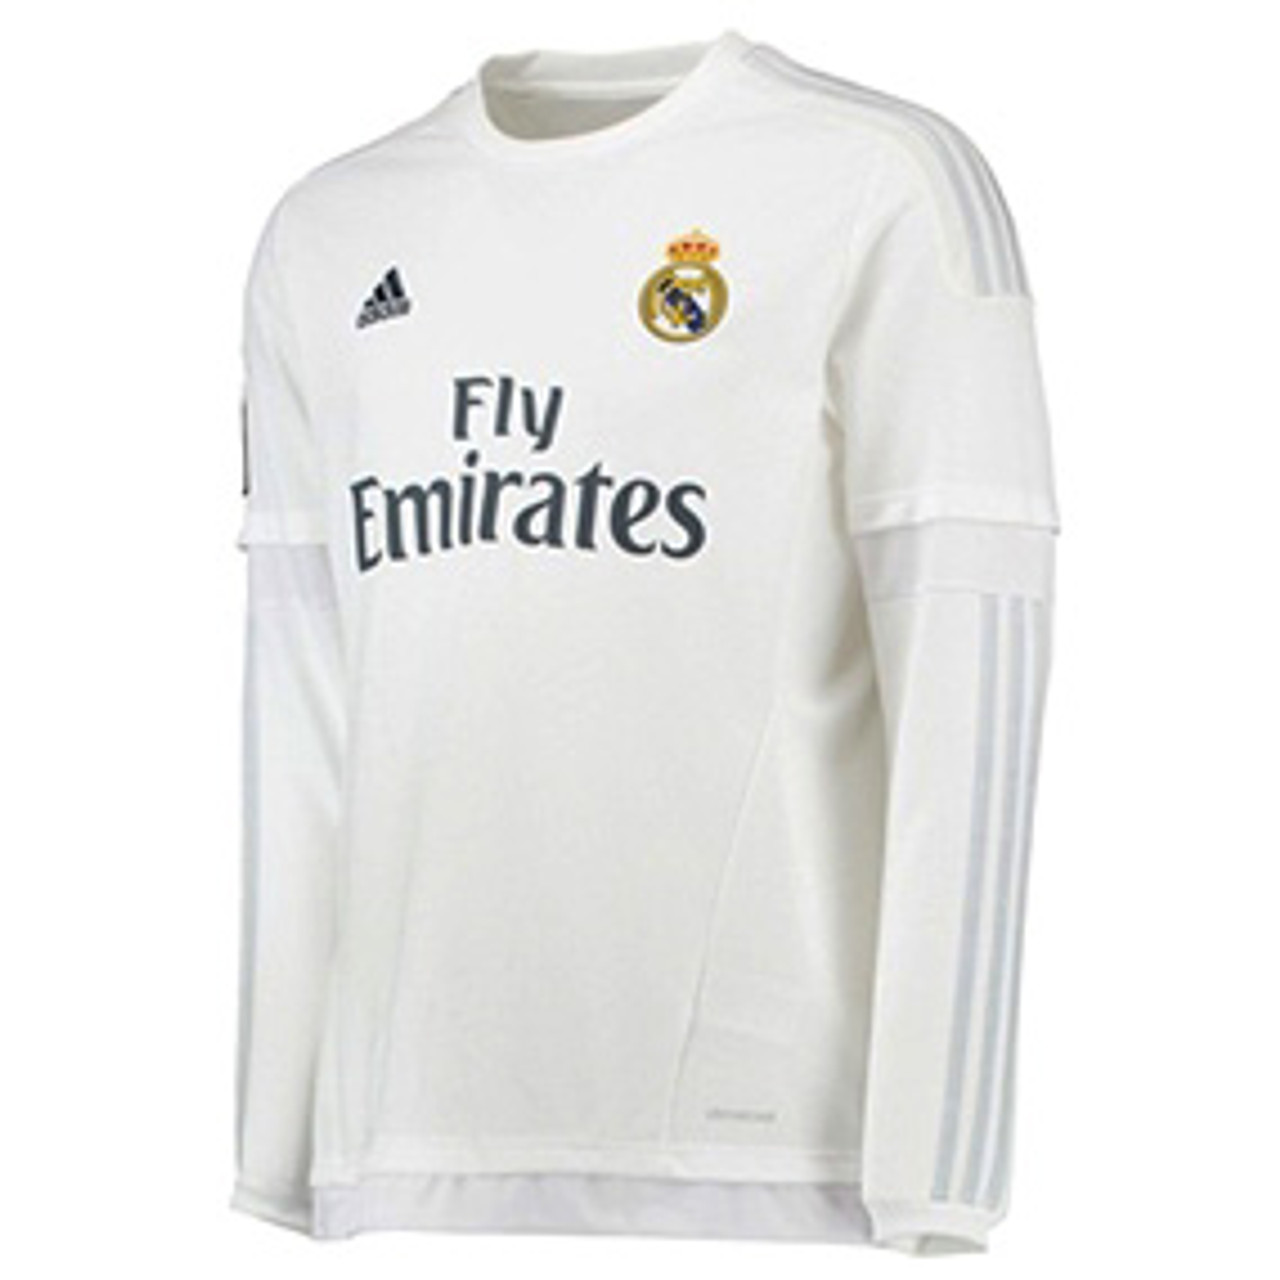 Adidas Men's Real Madrid Home Jersey - White, L